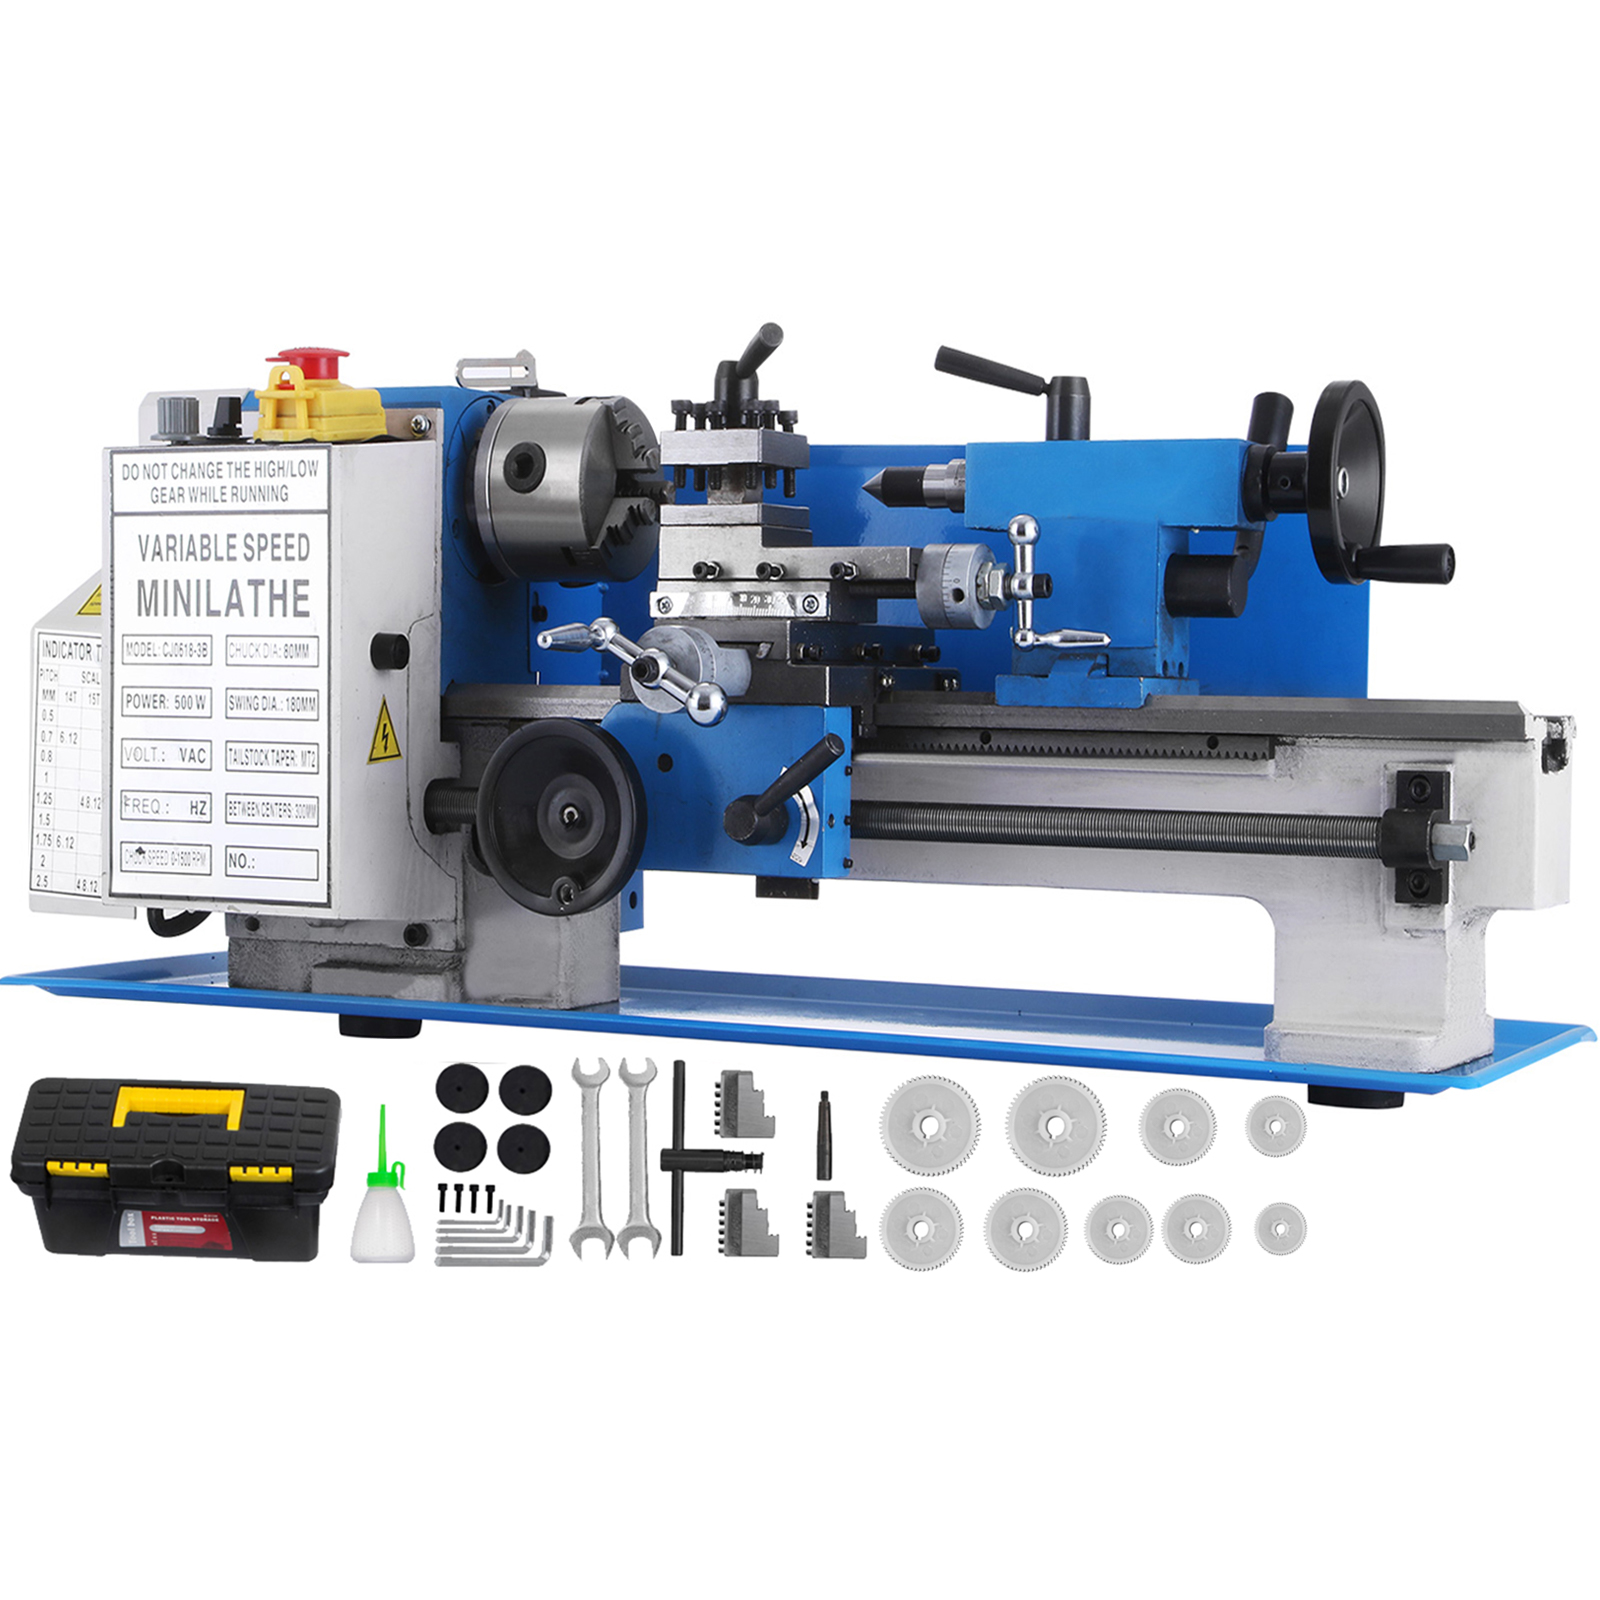 metal lathe,7x12inch,variable speed